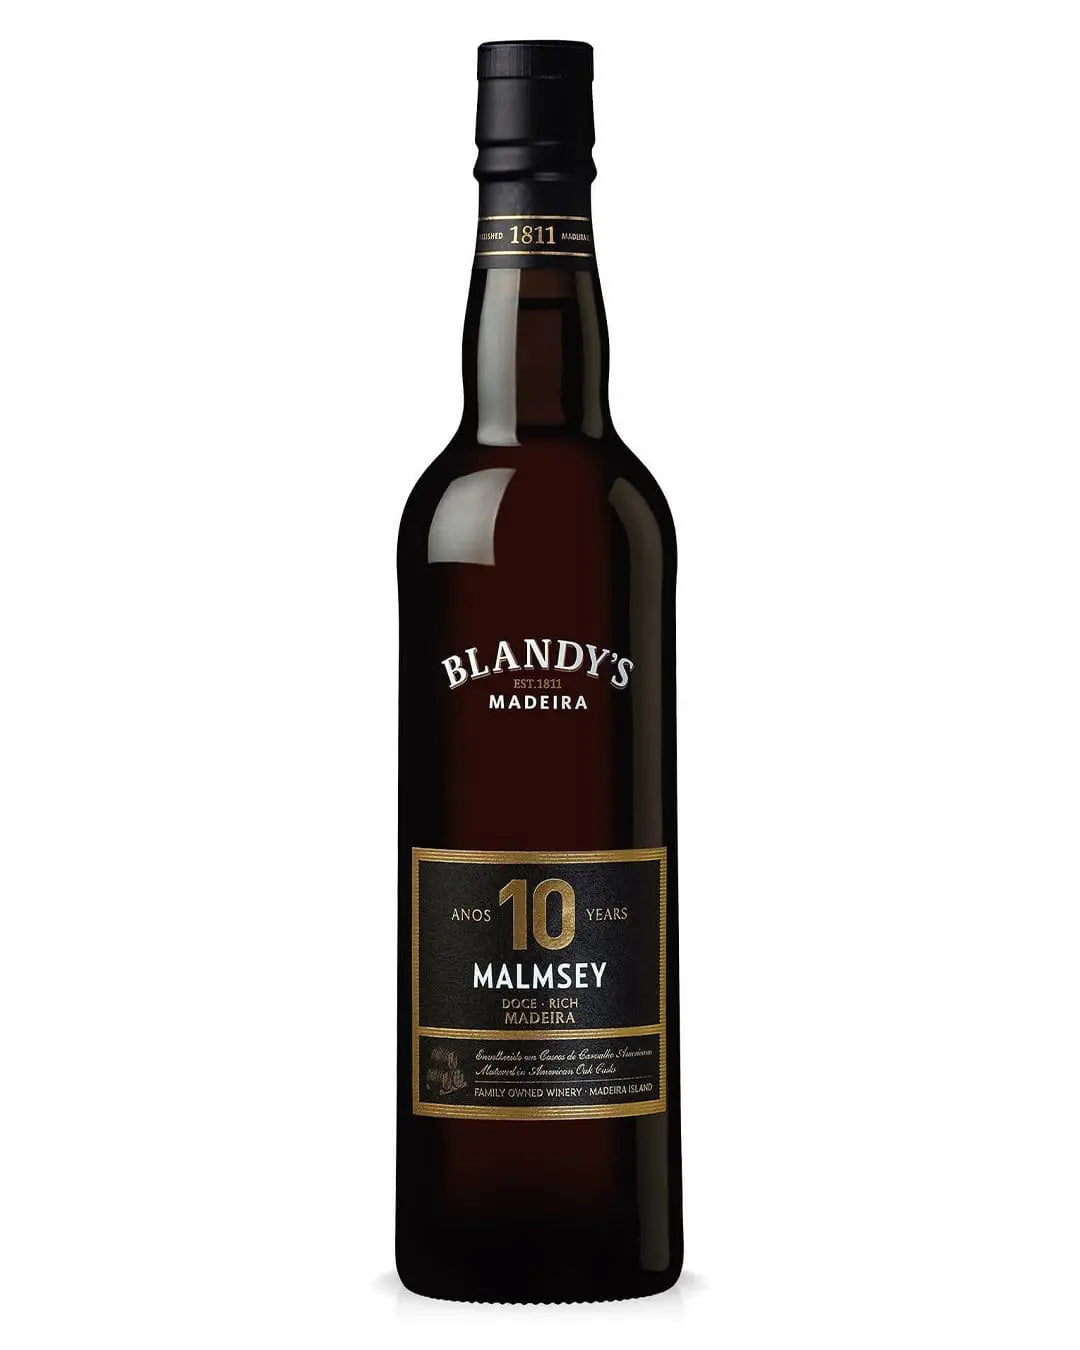 Blandy’s Madeira 10 Year old Malmsey, 50 cl Fortified & Other Wines